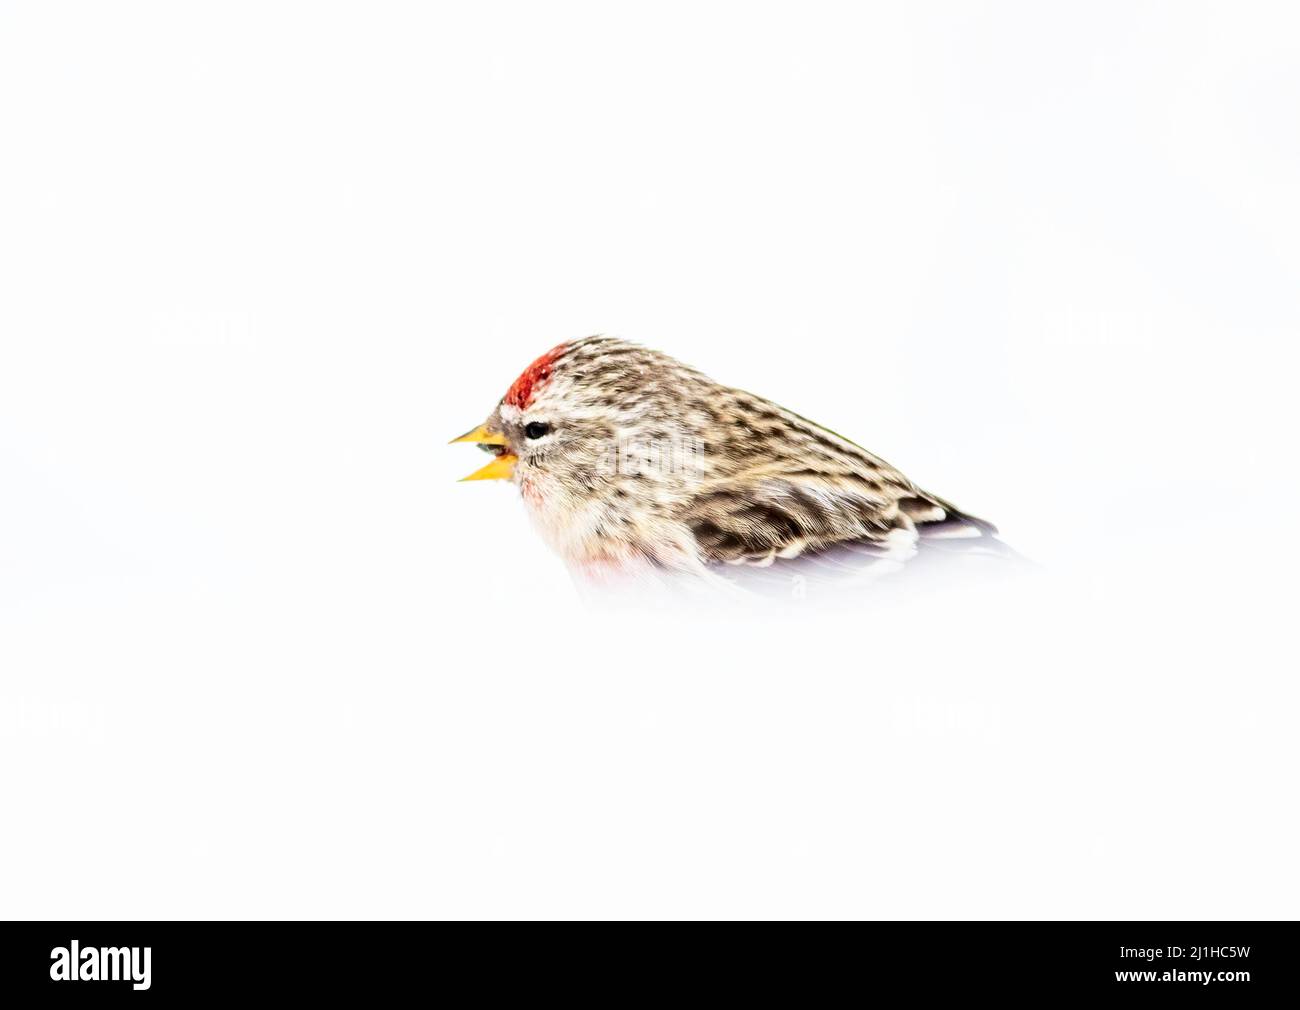 A common redpoll warbler in the cold snowy winter of Northern Minnesota in Sax Zim Bog. Stock Photo